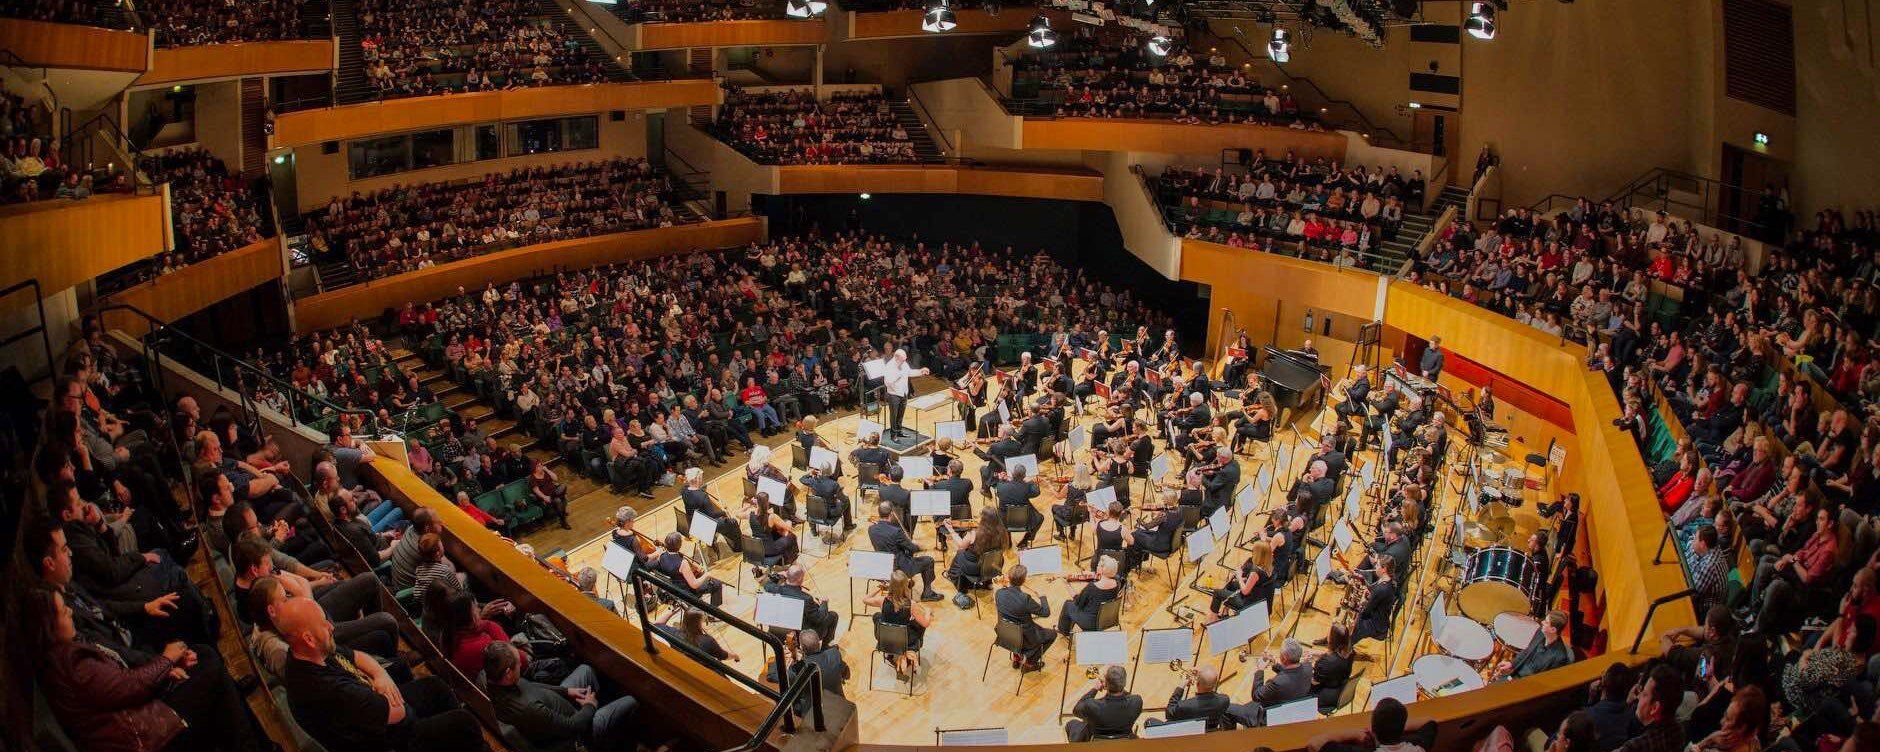 Wide angle view of stage and audience at St. David's Hall